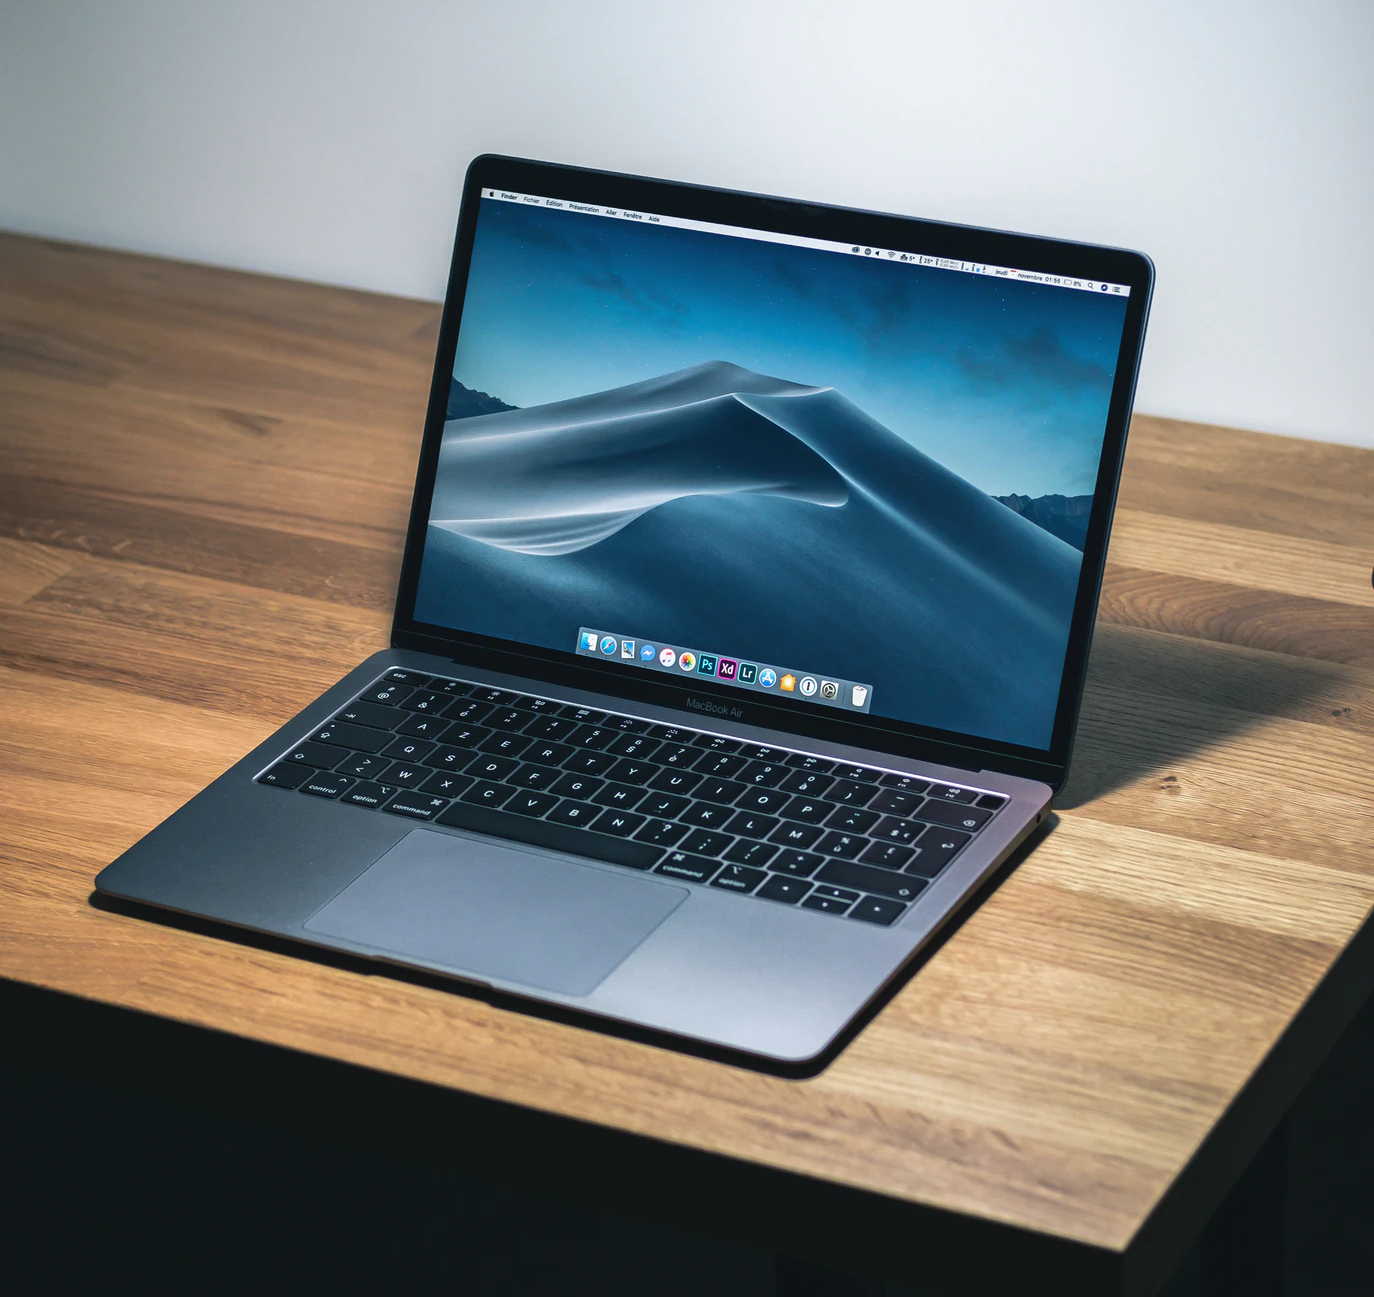 Next-Generation MacBook Pro Models With M2 Pro and M2 Max Chips Reportedly  'Delayed Once Again' - MacRumors